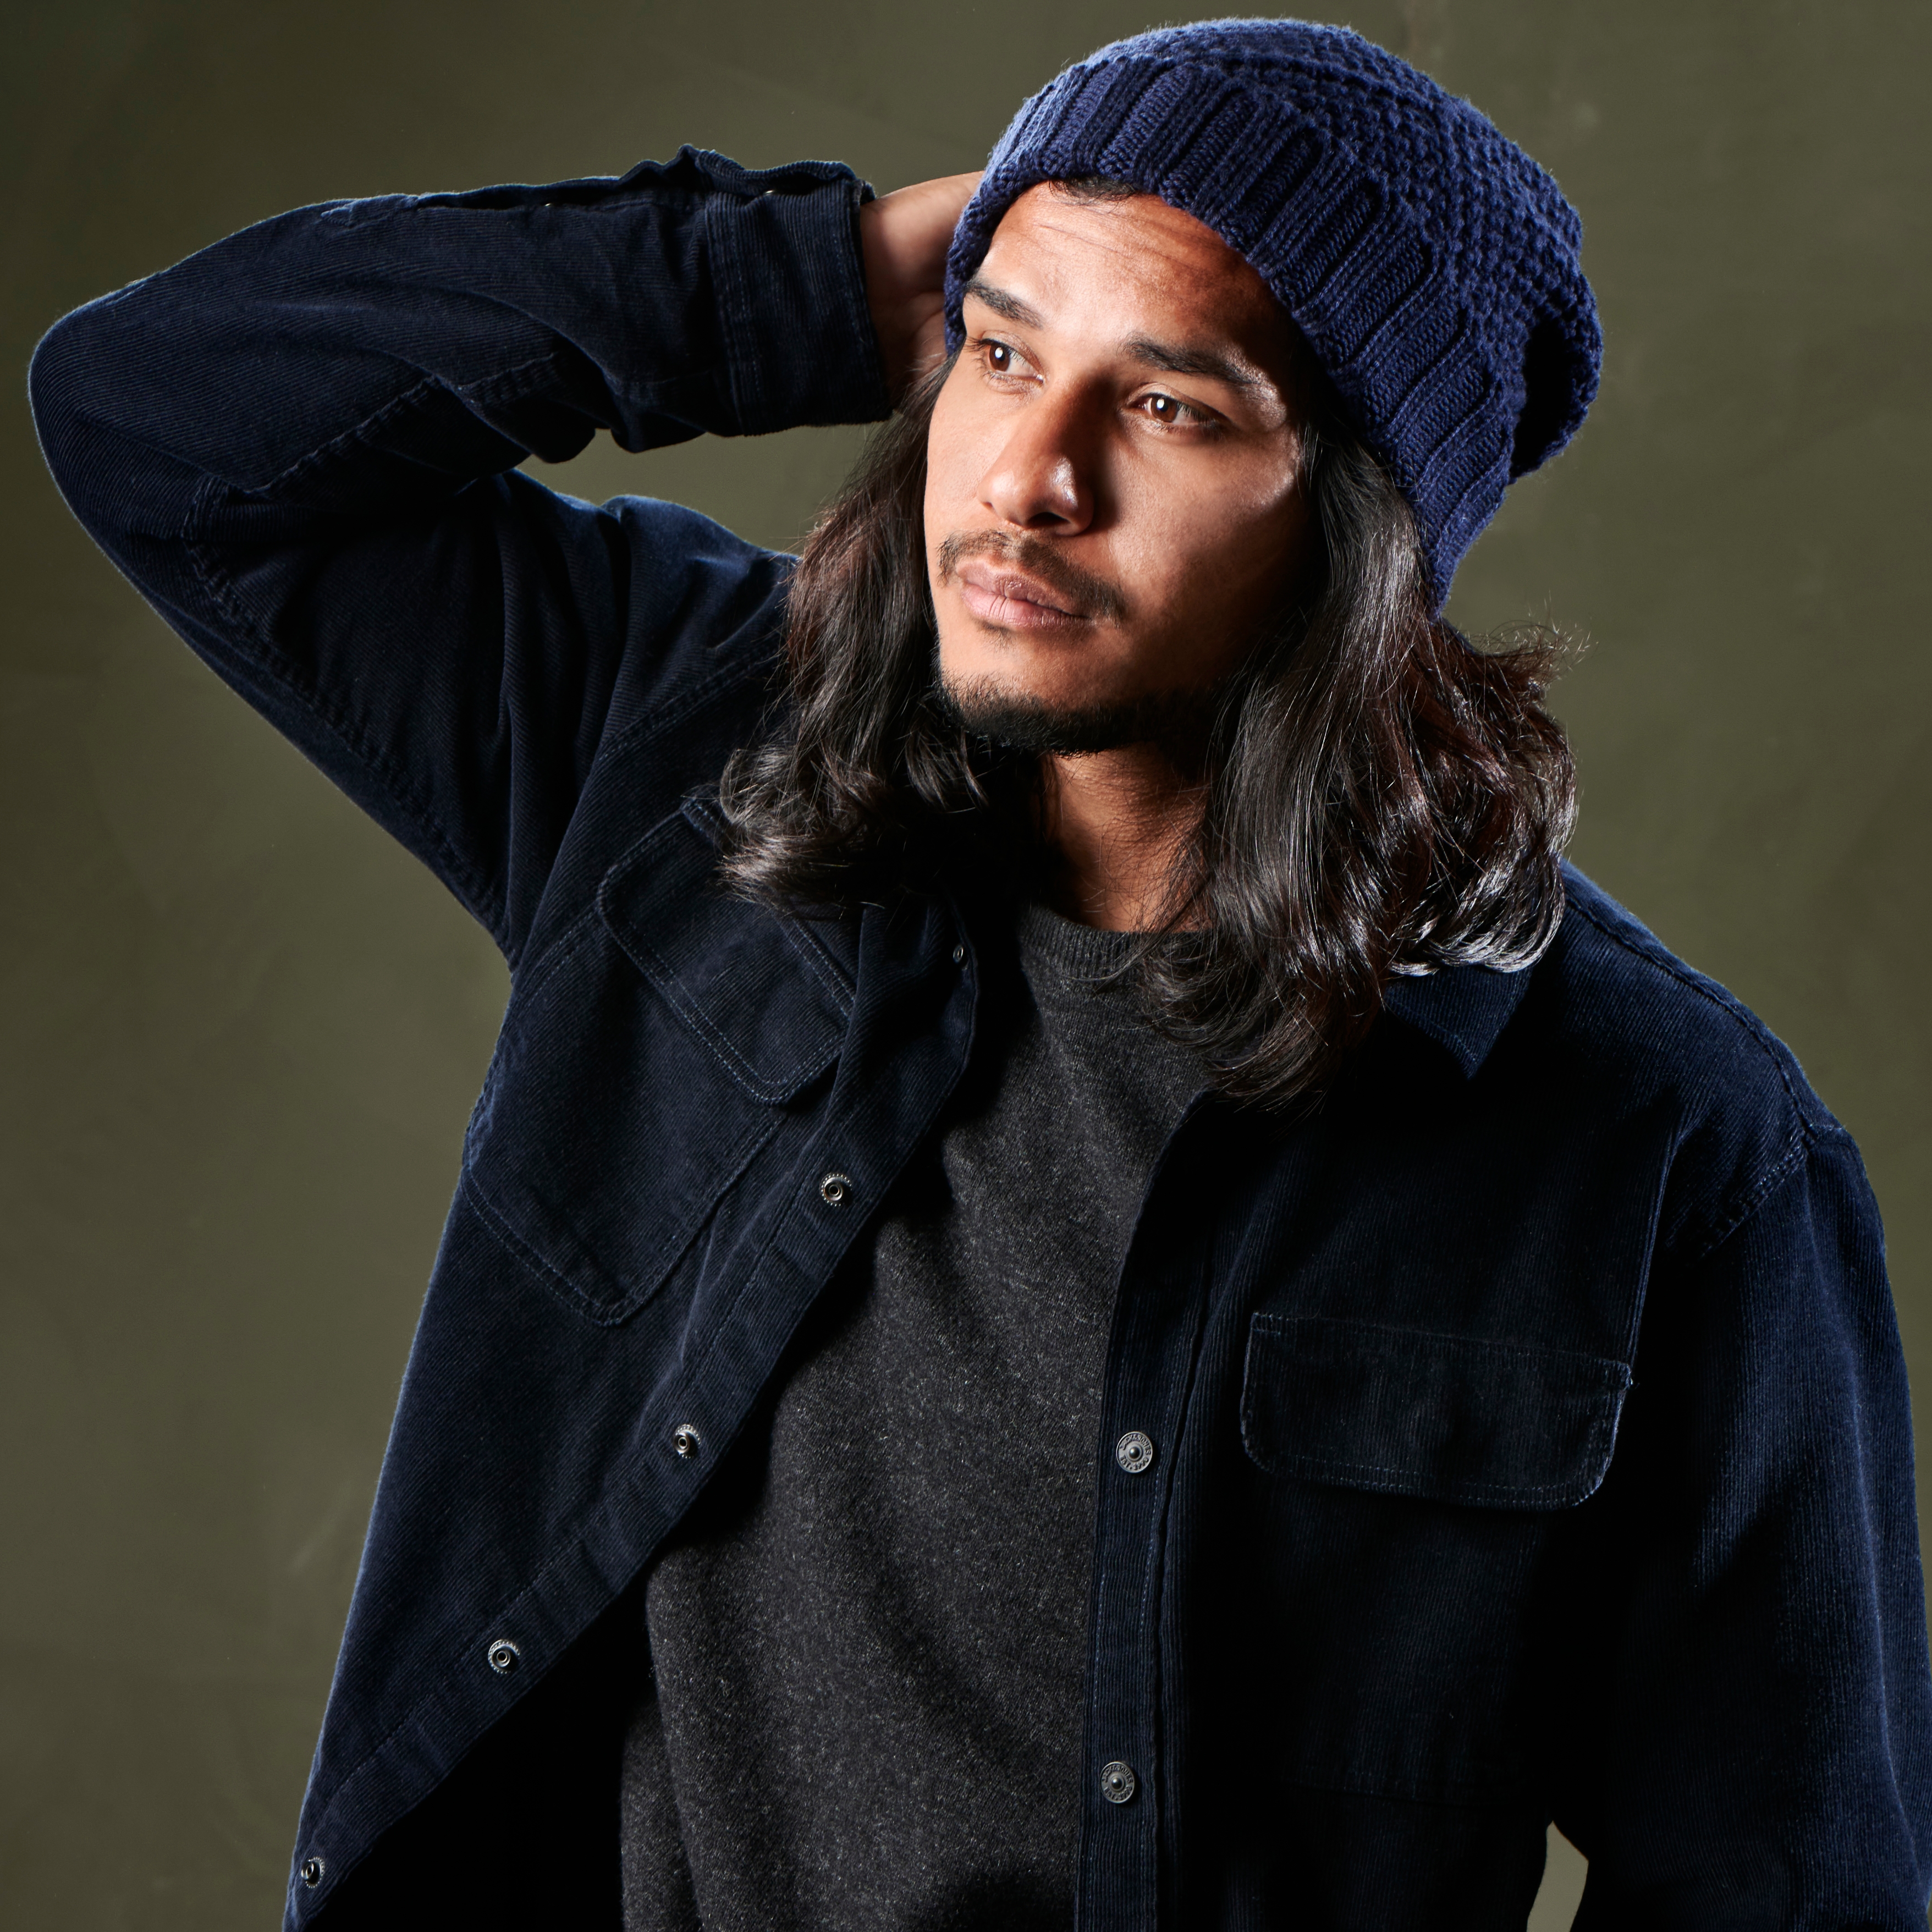 krabbe Rasende Gud How to Wear a Beanie: The Ultimate Guide for Men